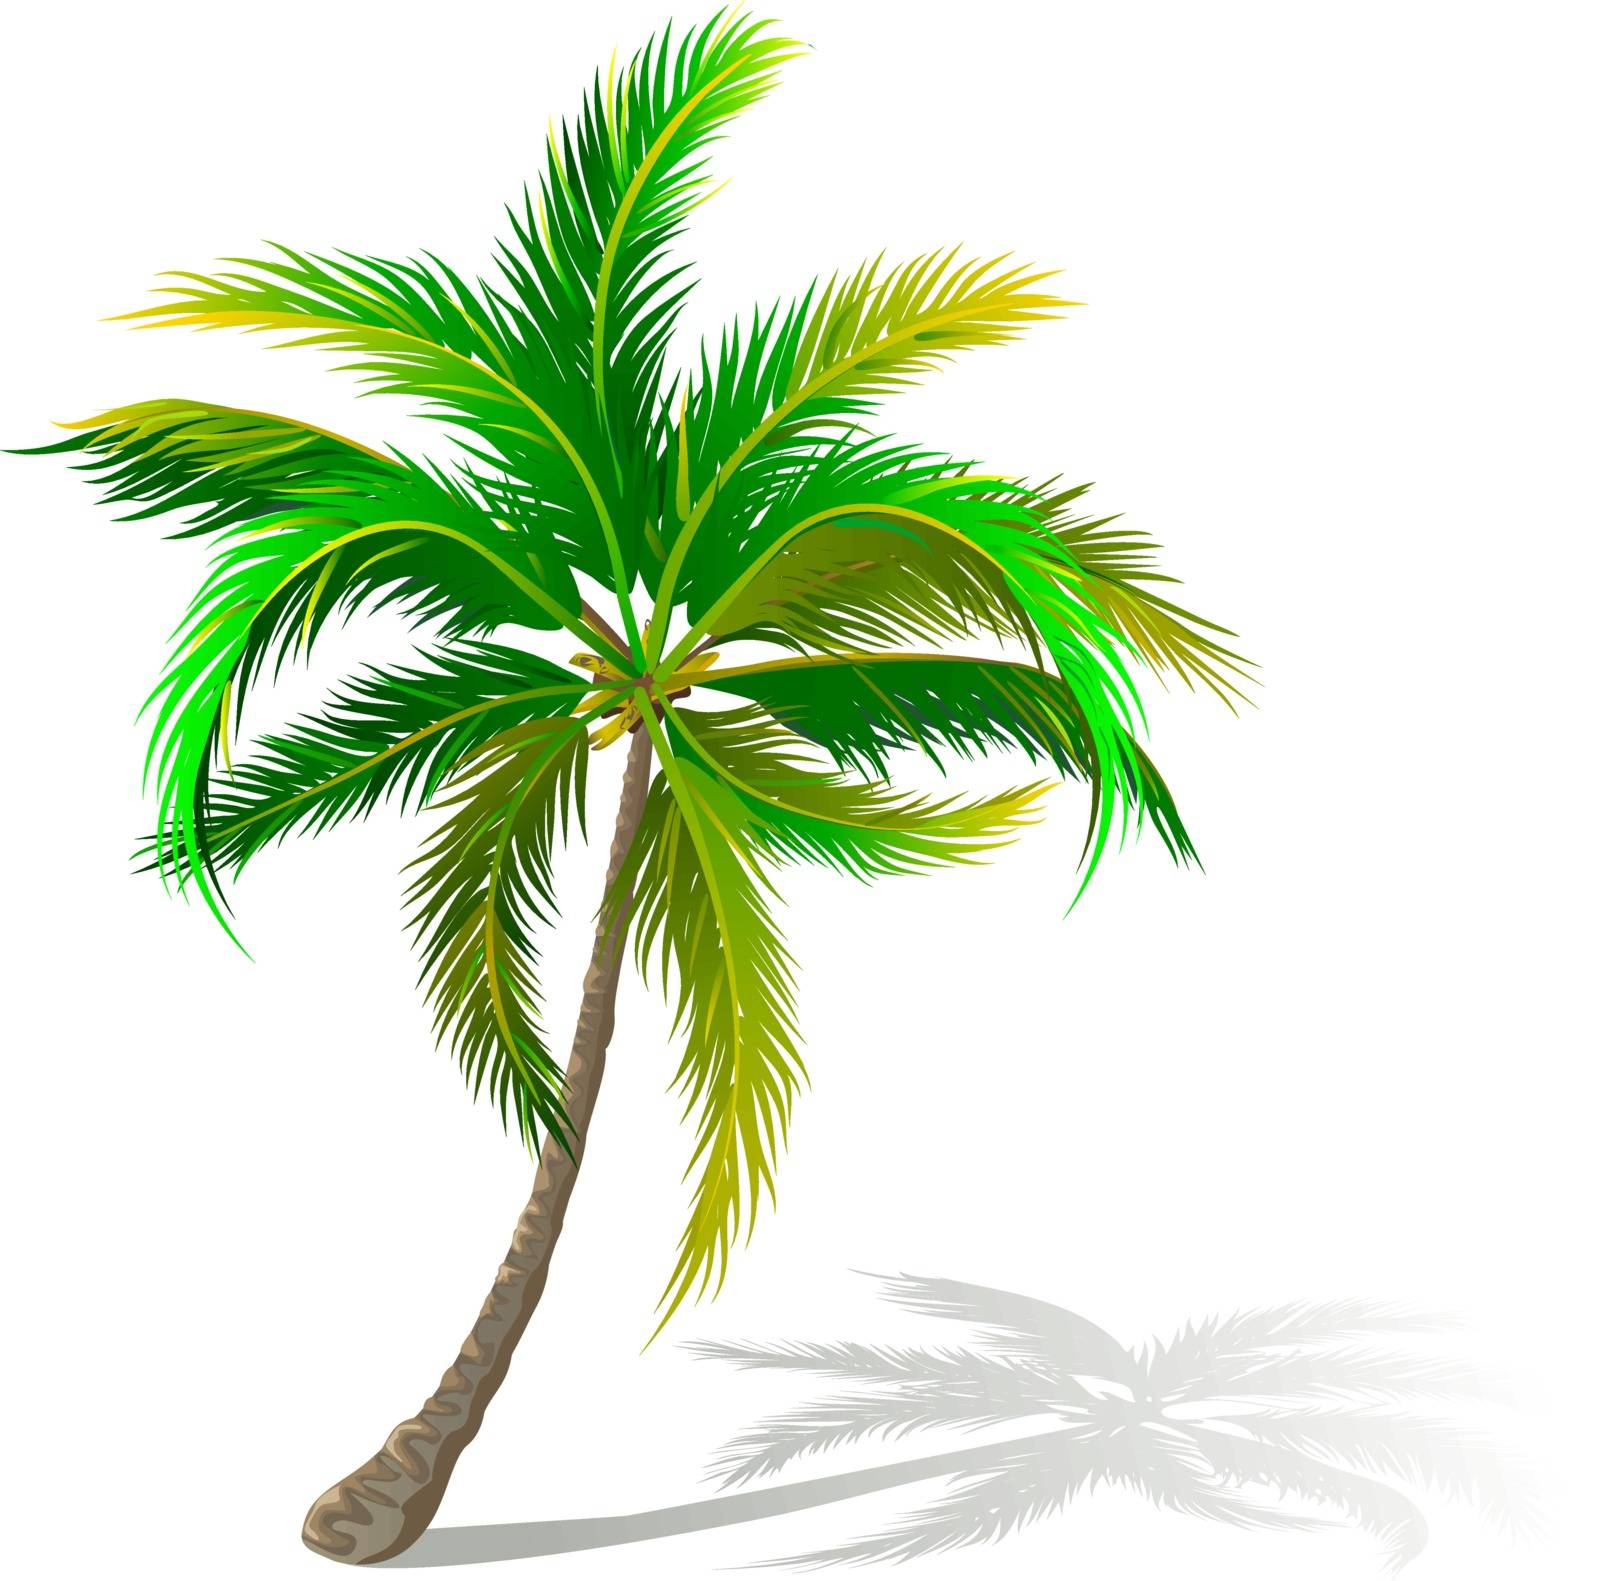 A palm tree on a white background. A palm tree with green leaves. A palm with large leaves.